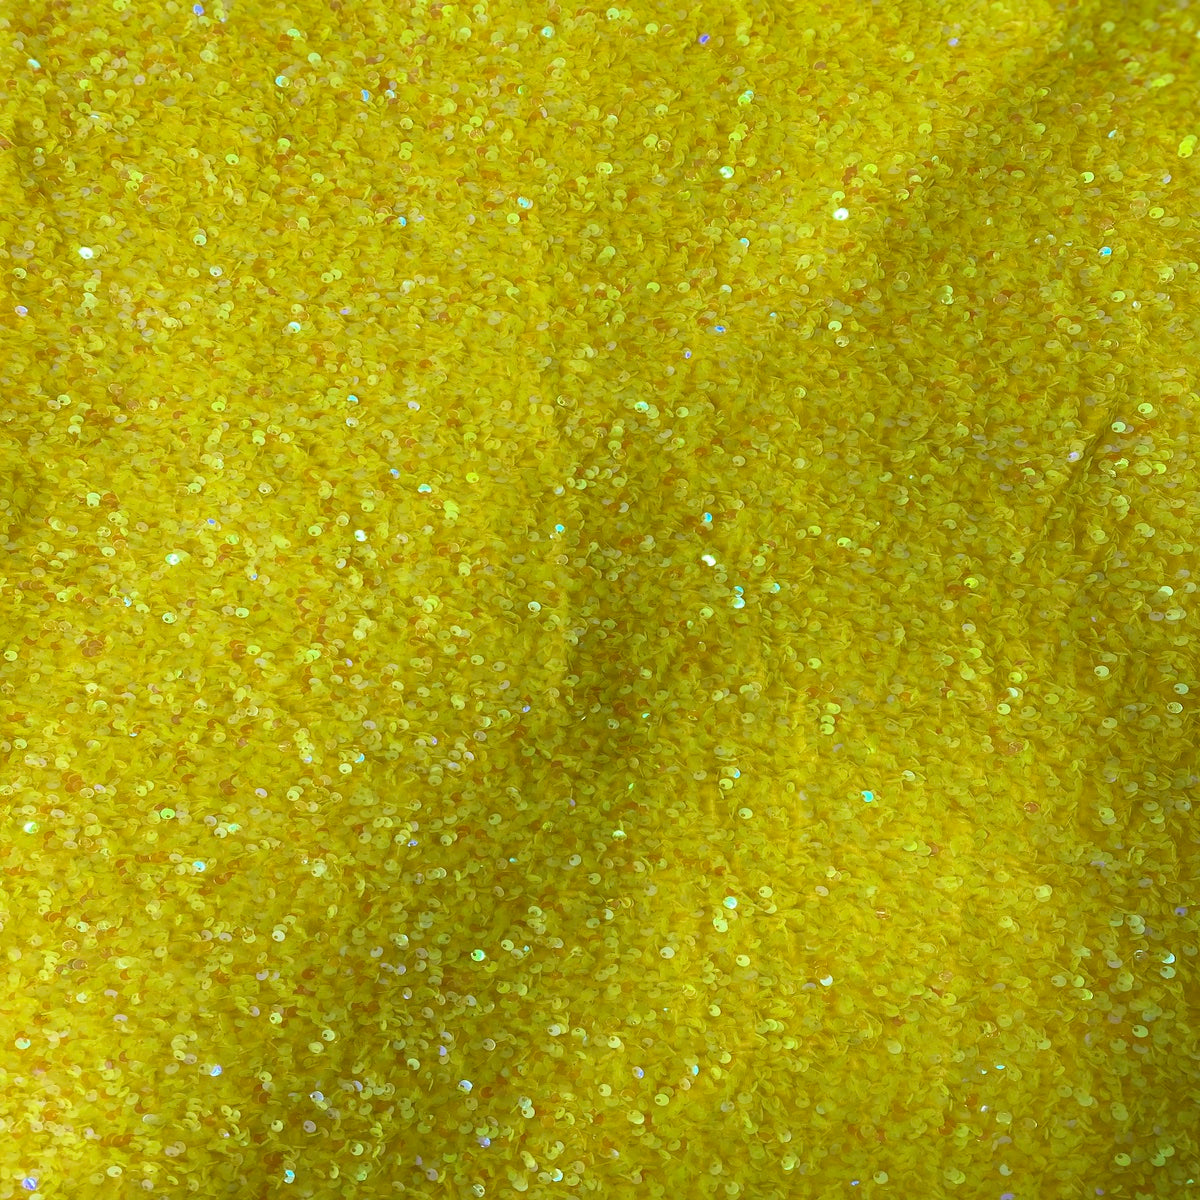 Yellow Iridescent Sequins Embroidered Stretch Velvet Rodeo Fabric - Fashion Fabrics LLC